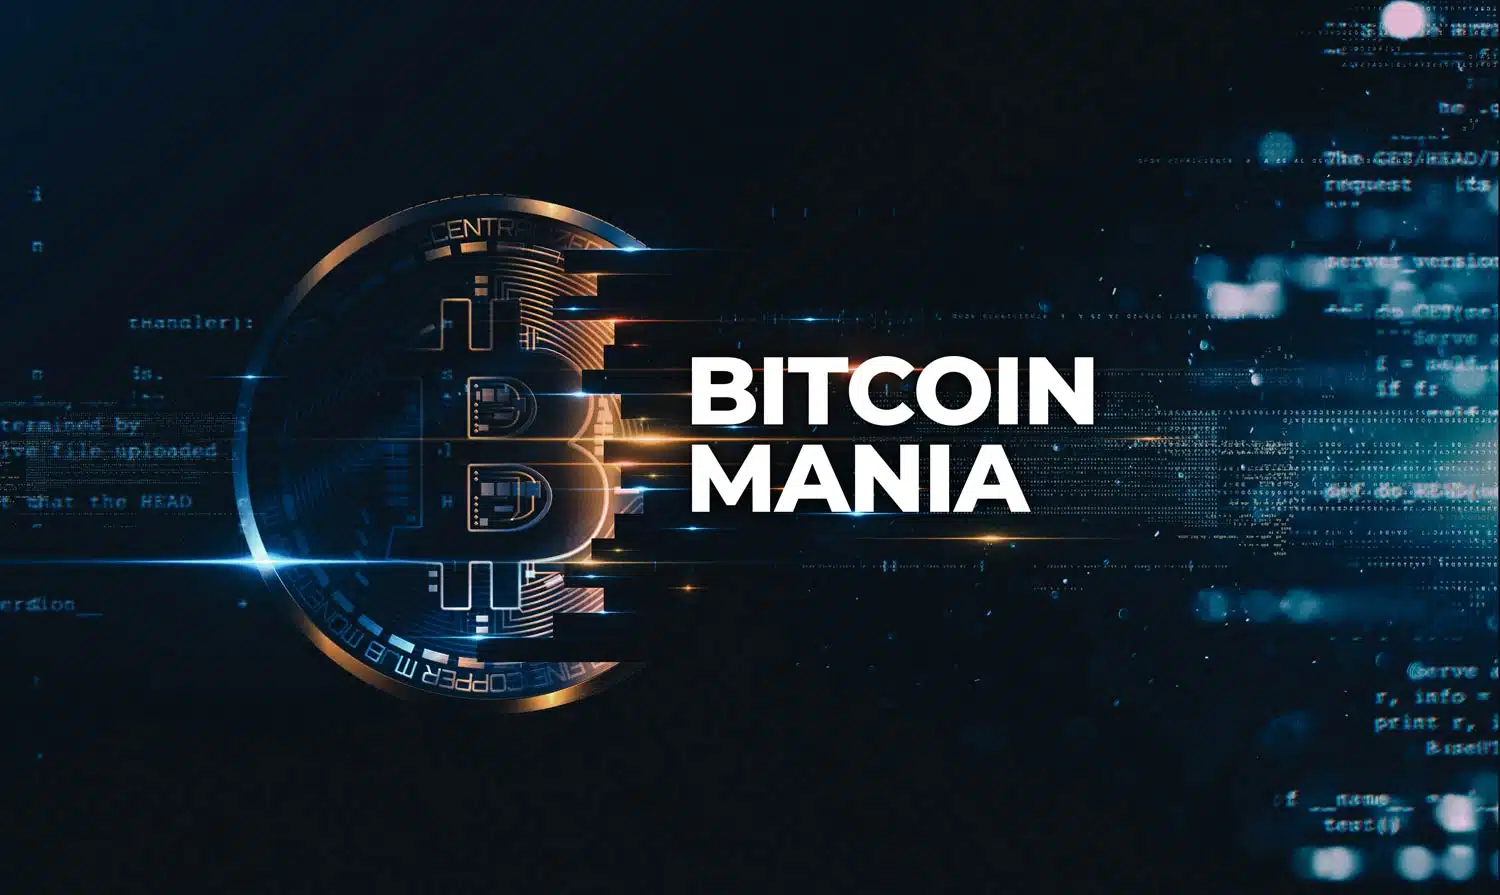 Featured image for “Bitcoin Mania”